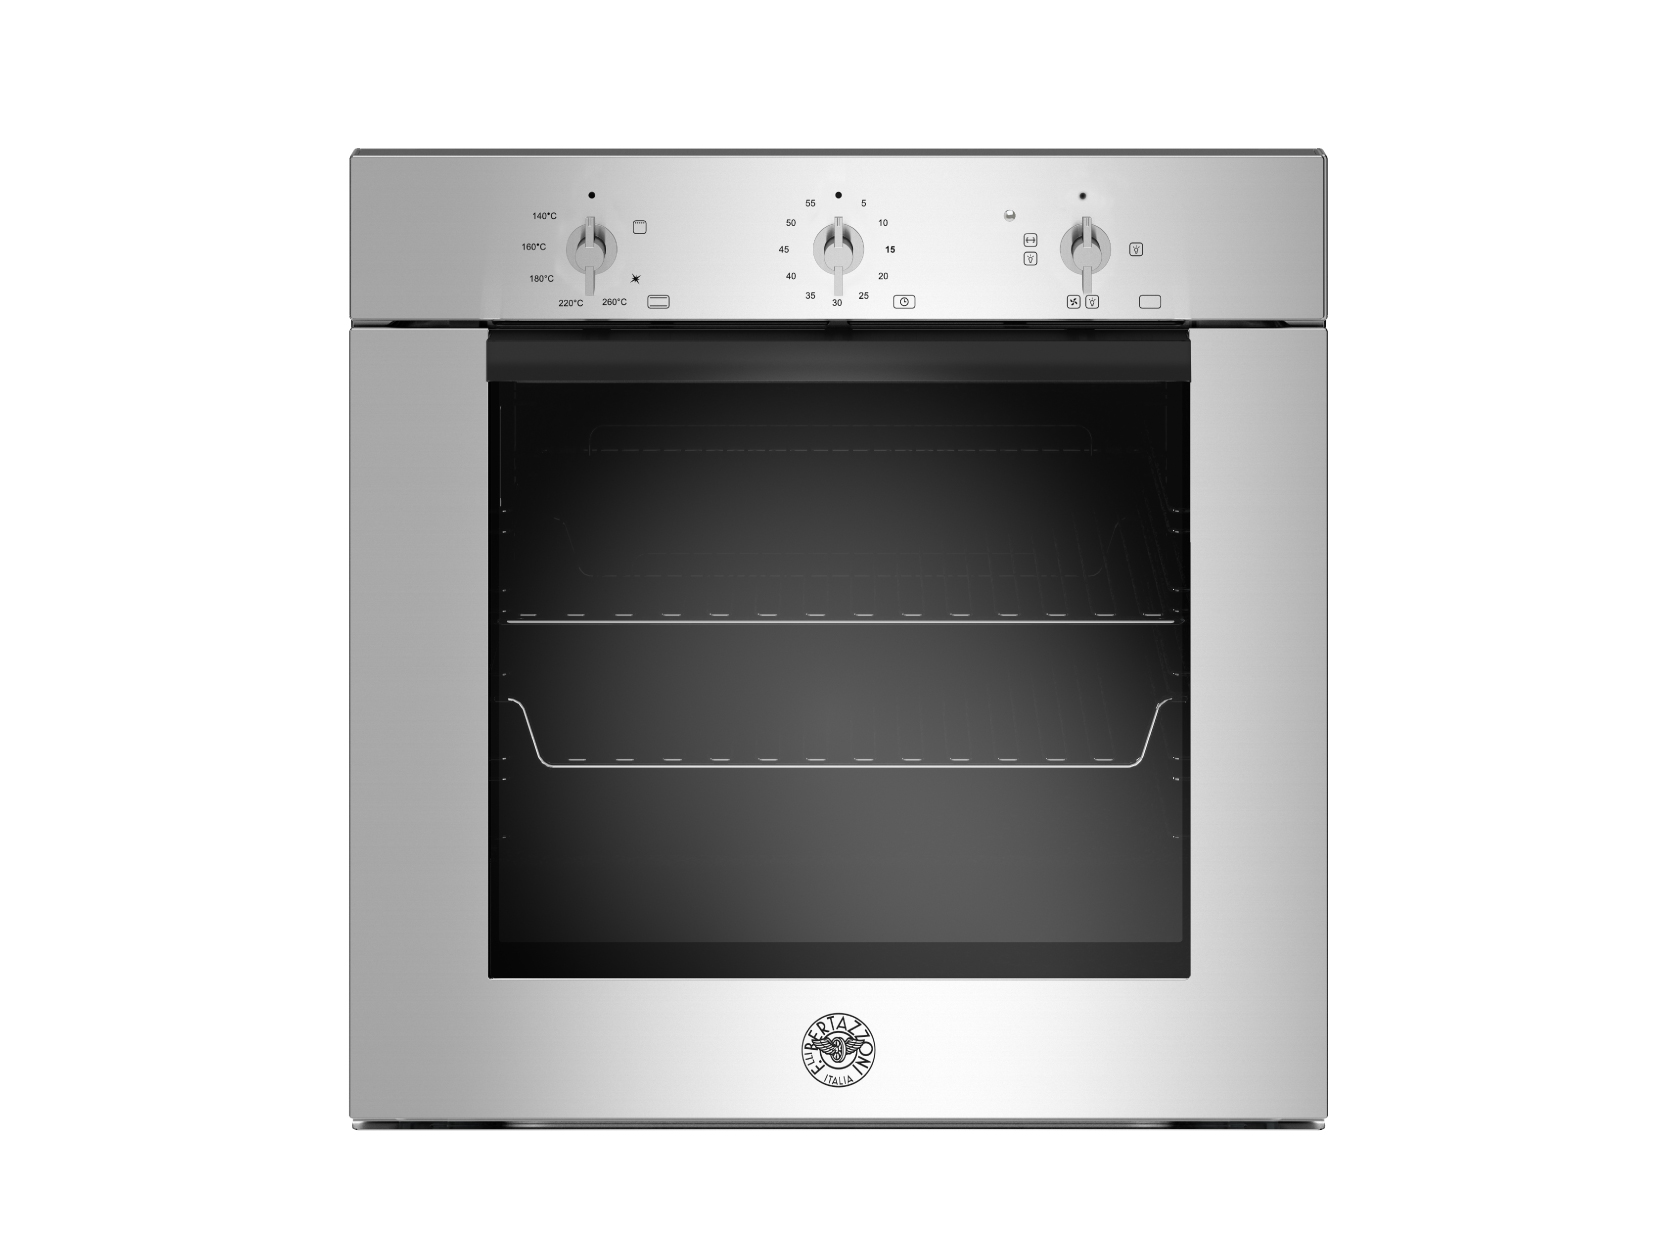 All About The Grill Function Of the Oven